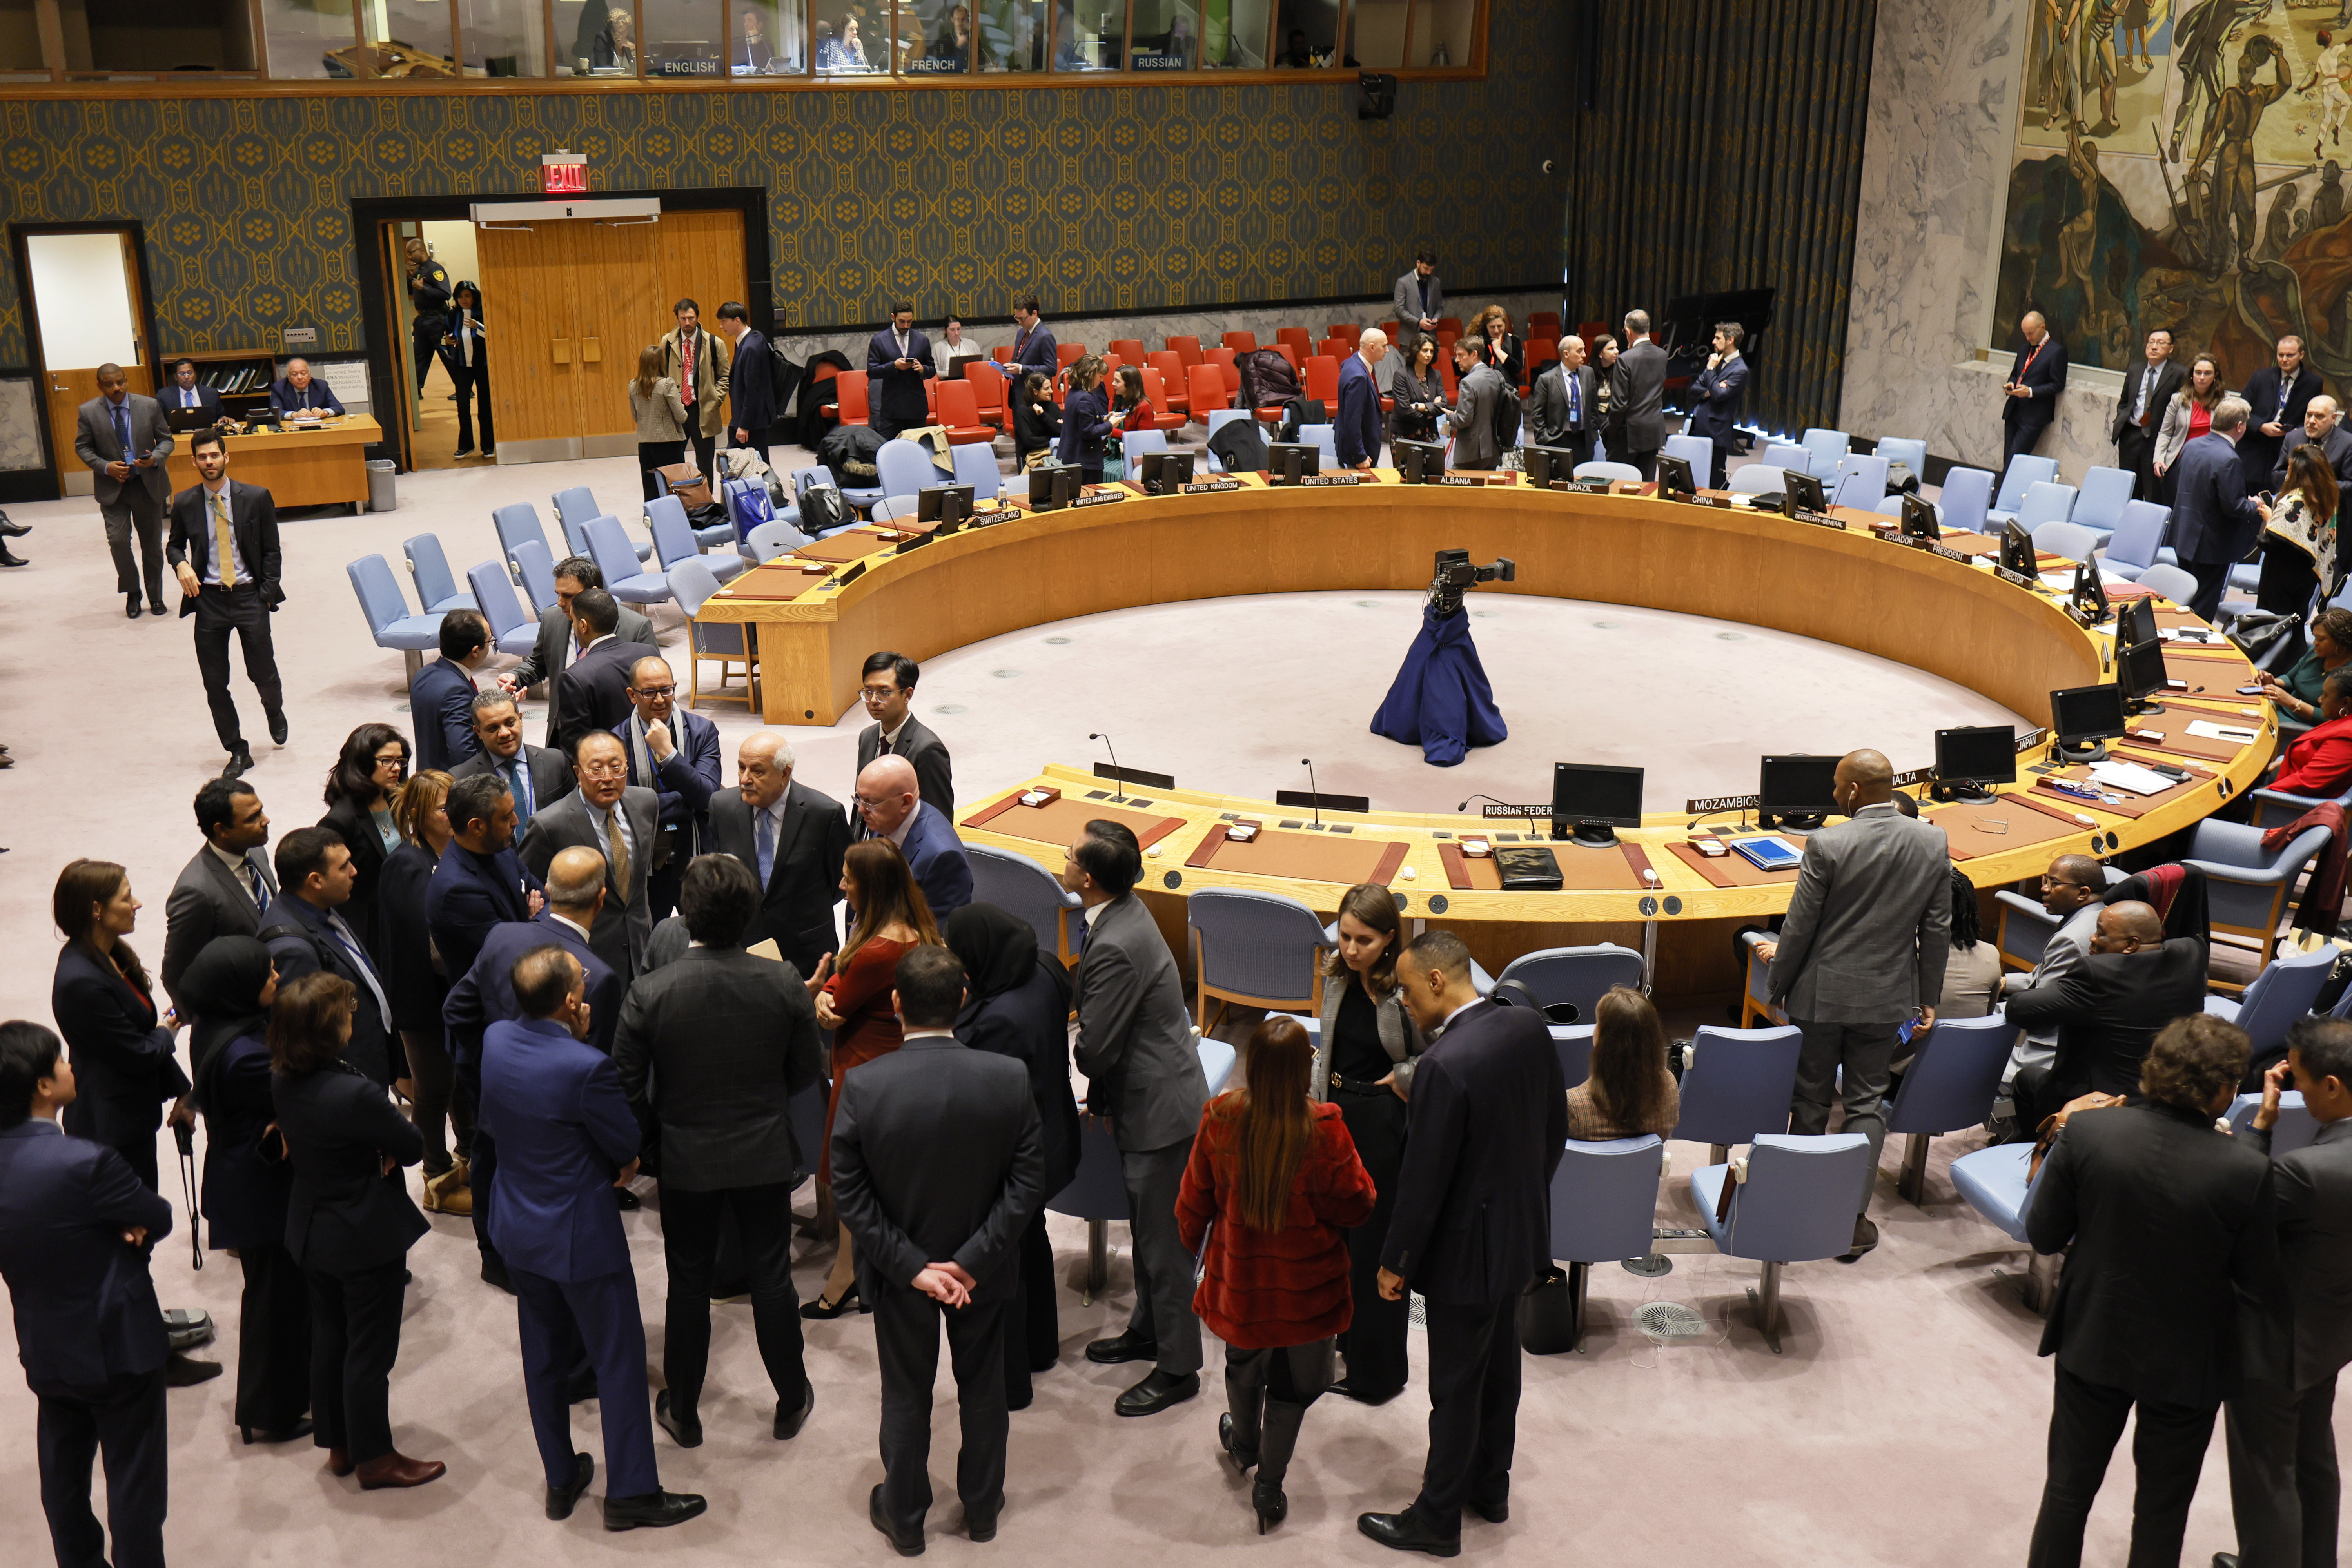 Members of the United Nations Security Council hold sideline meetings as they take a break at the UN headquarters in New York on December 19.